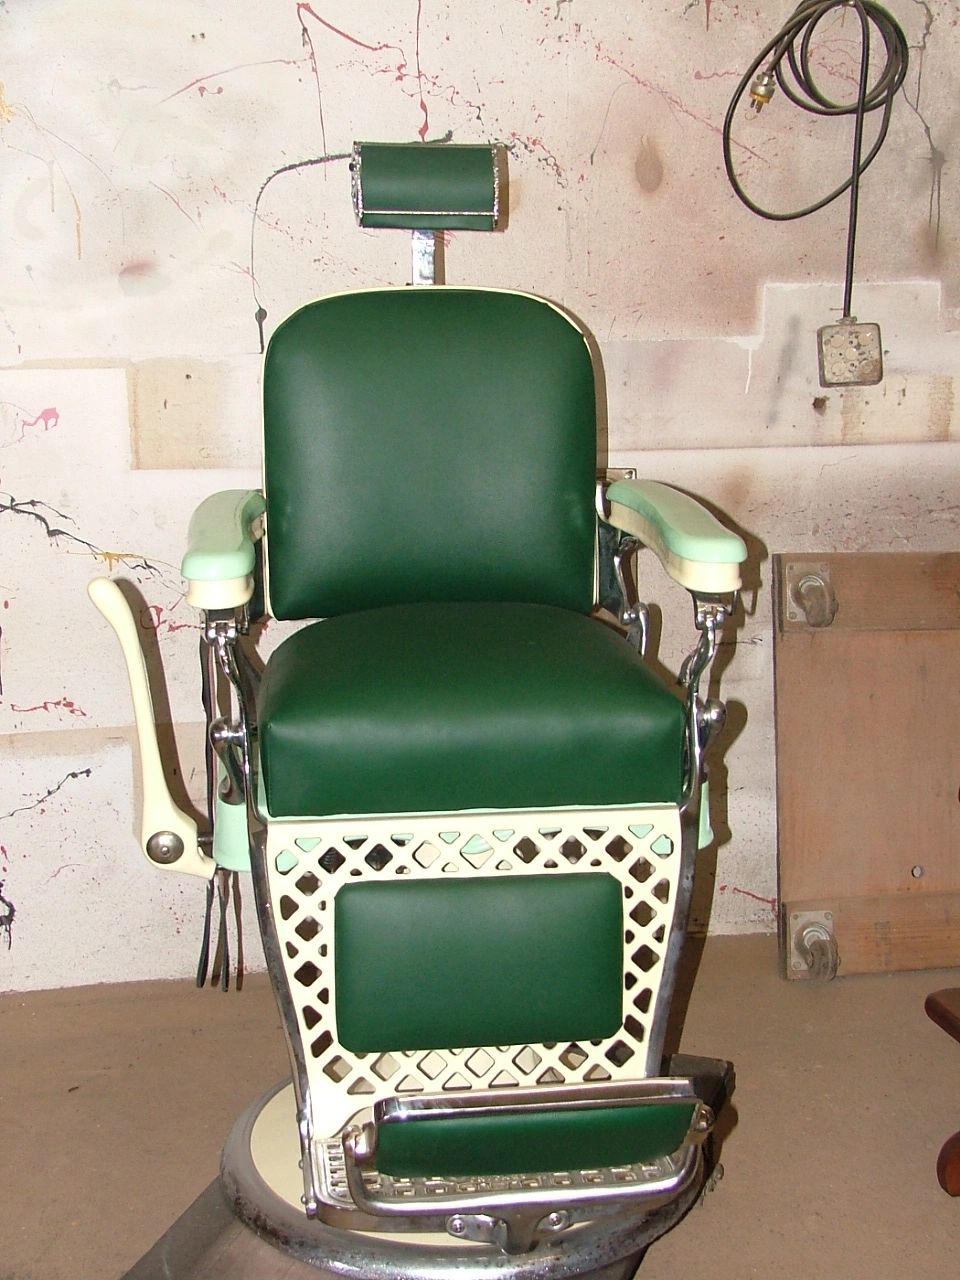 Antique Barber Chair Restored